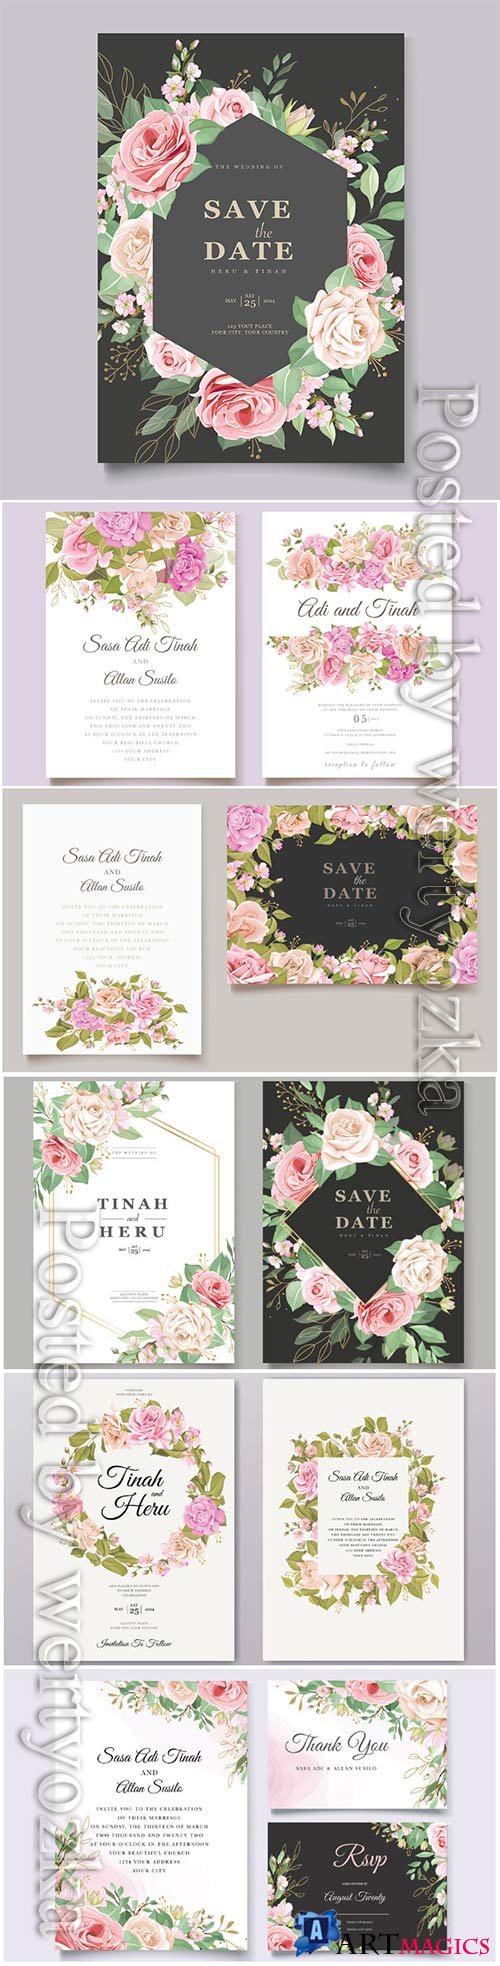 Wedding invitation cards with flowers in vector # 2